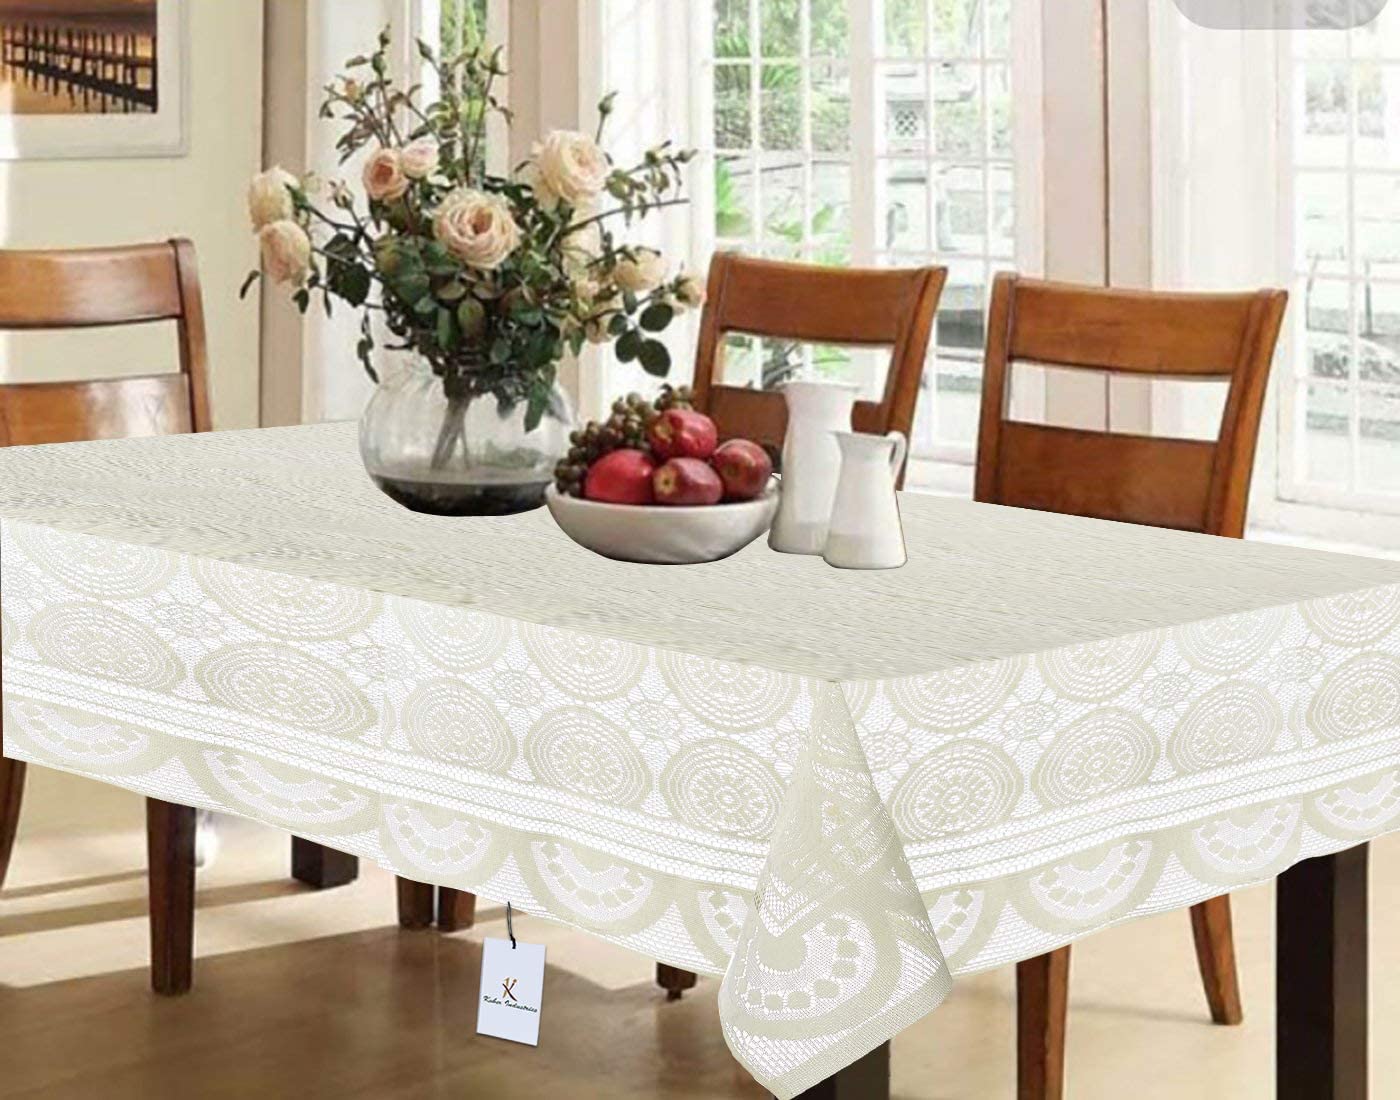 Kuber Industries Dining Table Cover 6 Seater|Table Cloth|Table Cover for Home, Restaurant|Cotton Dining Table Cover for 6 Seater (Cream)(Rectangular, pack of 1)